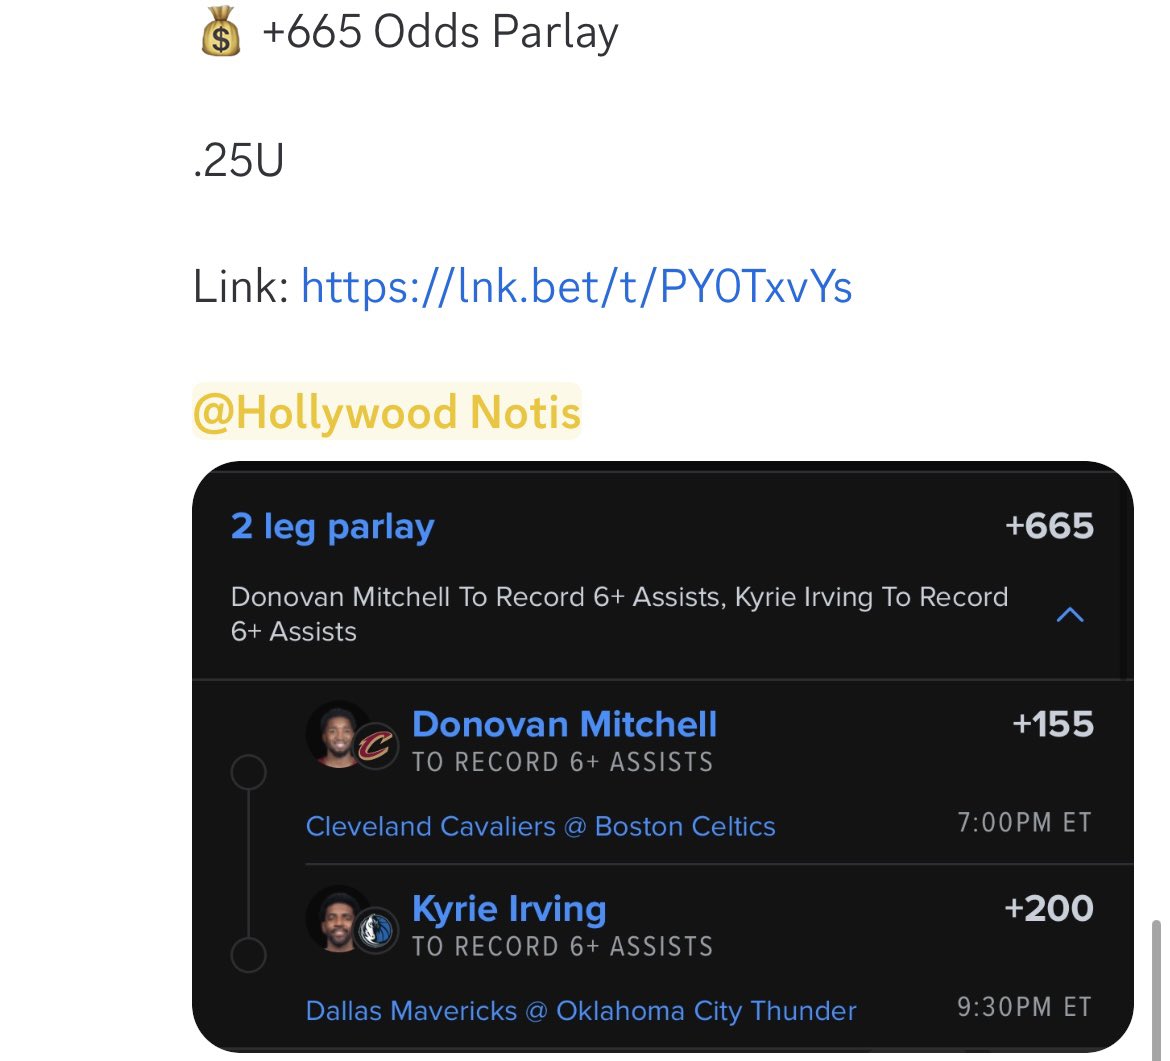 BANGGGG!!! ✅ BACK TO BACK NIGHTS FOR THE DISCORD!!! 🚀🚀 use code “NBA” to get into our discord for only $10 for your first month! See you in there! 🫡 @PremierPicksVIP Discord link: whop.com/premierpicks/